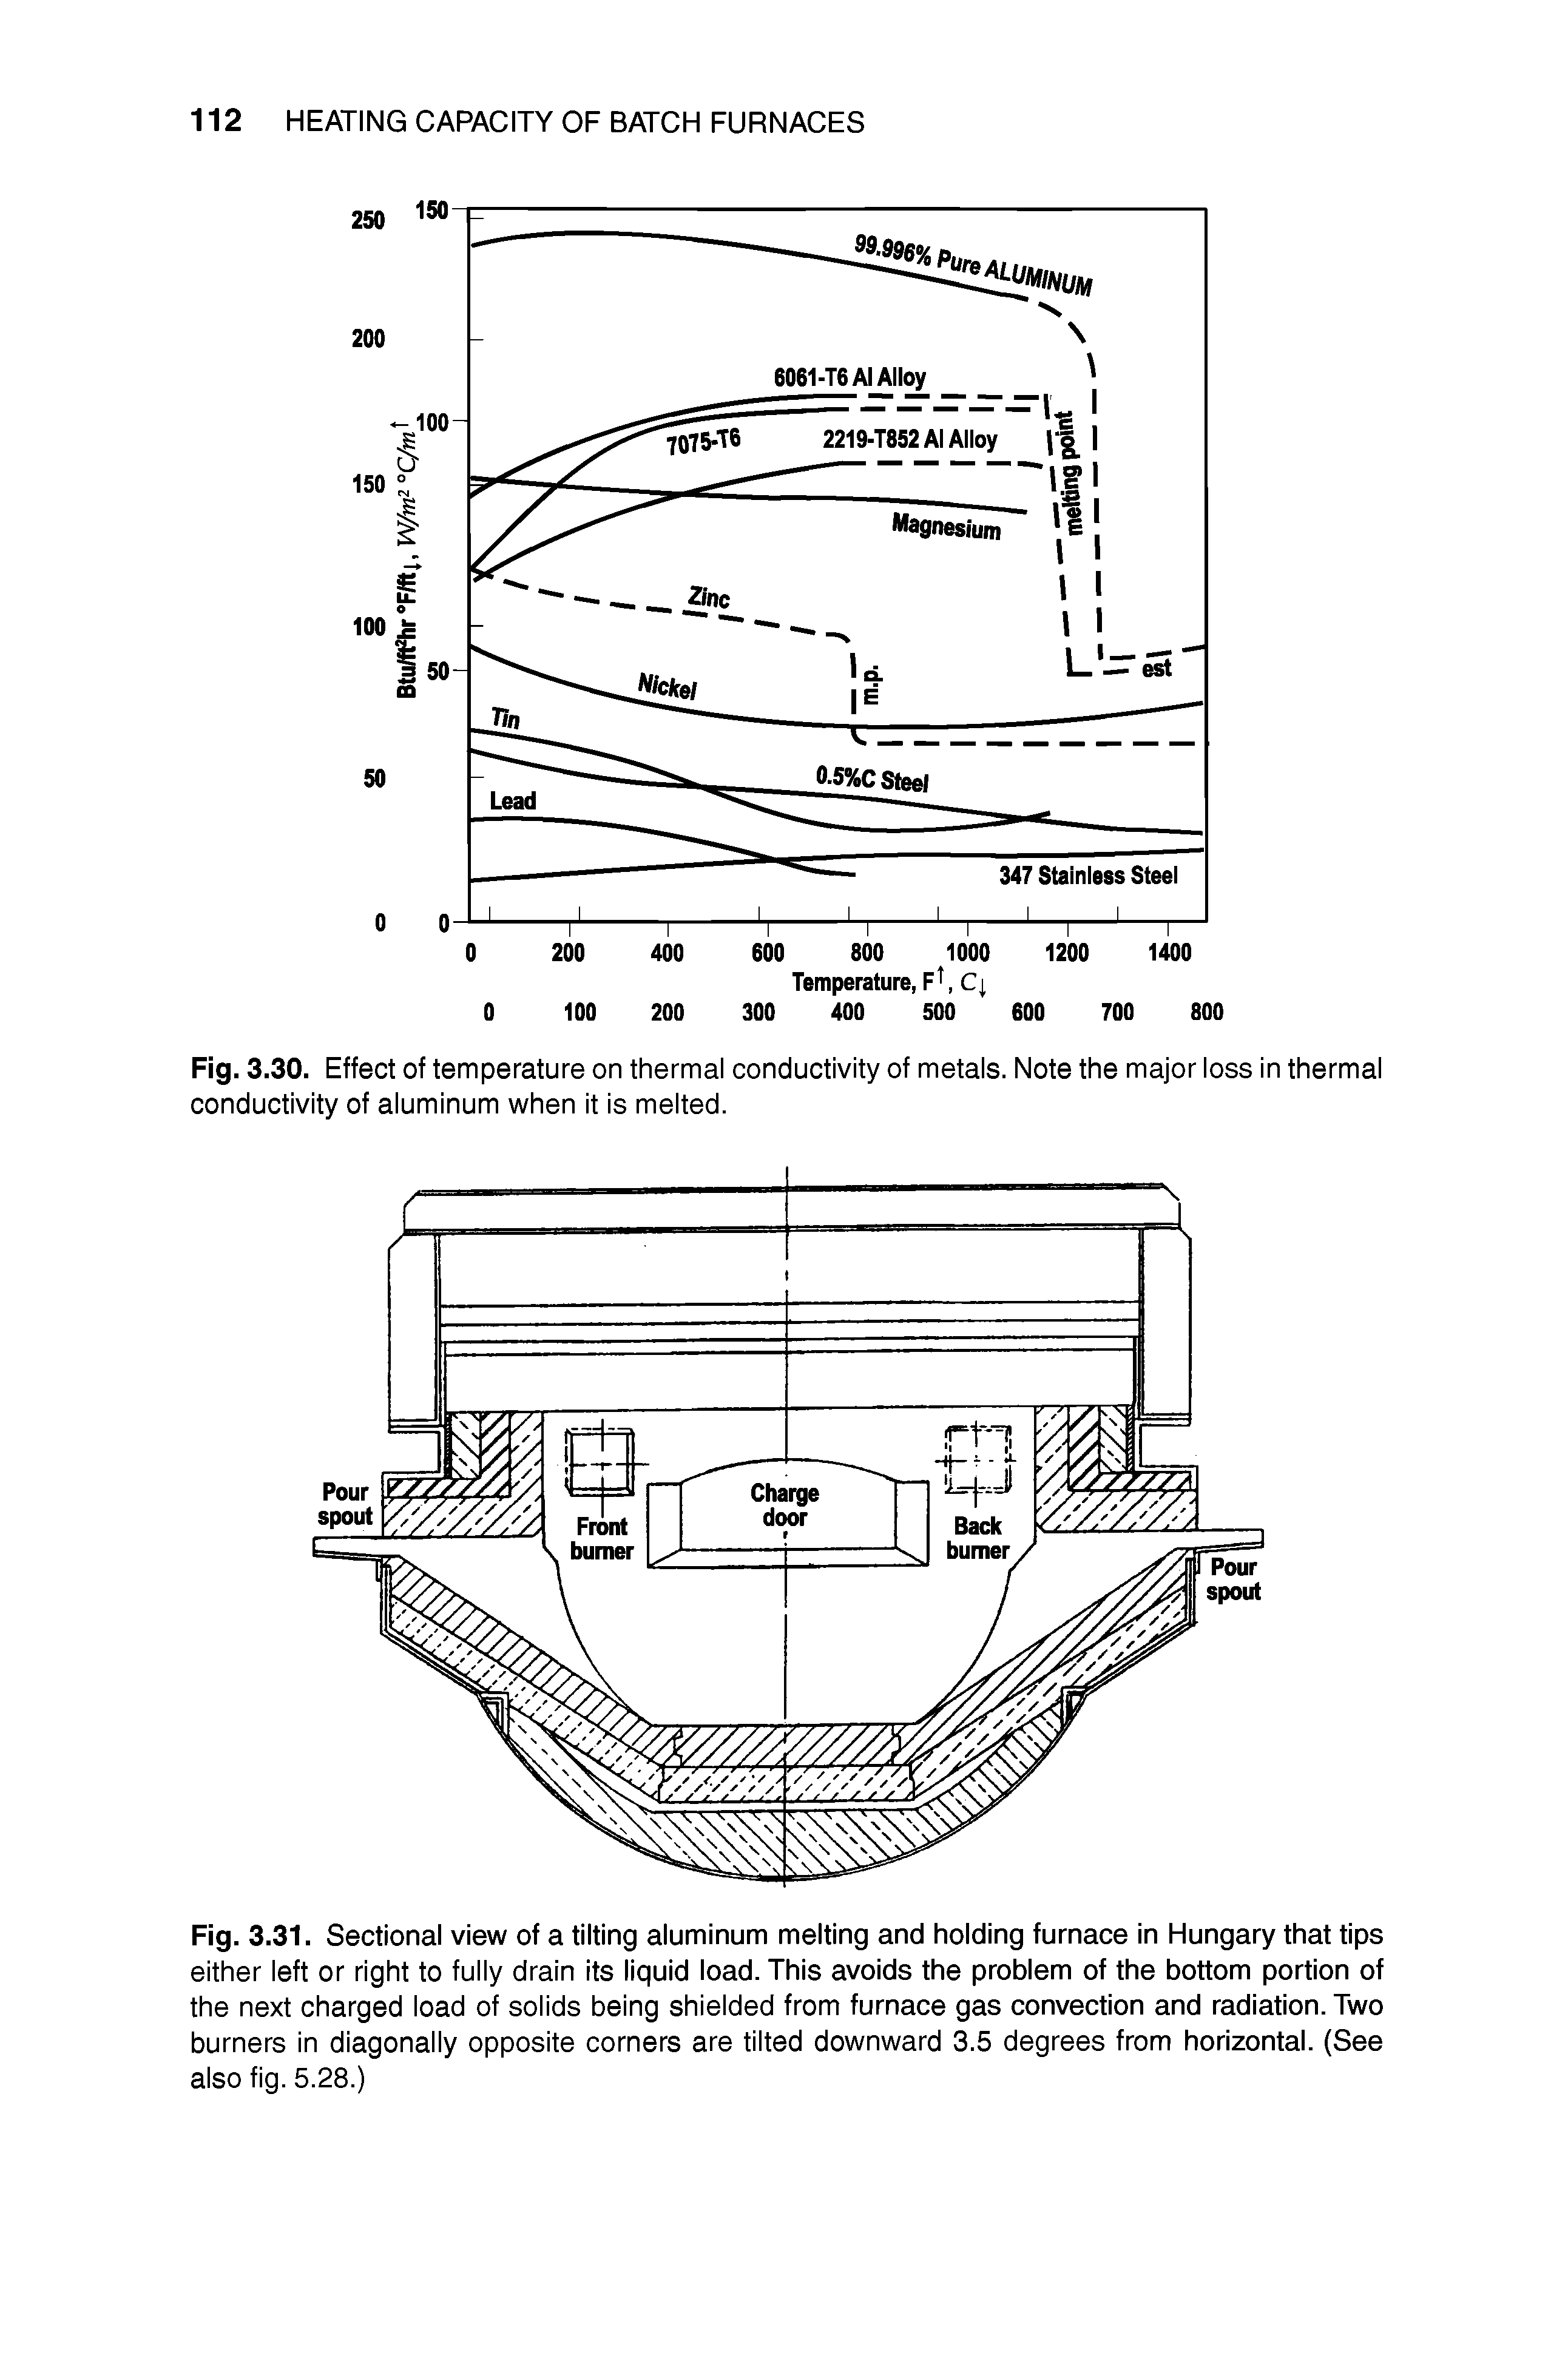 Fig. 3.31. Sectional view of a tilting aluminum melting and holding furnace in Hungary that tips either left or right to fully drain its liquid load. This avoids the problem of the bottom portion of the next charged load of solids being shielded from furnace gas convection and radiation. Two burners in diagonally opposite corners are tilted downward 3.5 degrees from horizontal. (See also fig. 5.28.)...